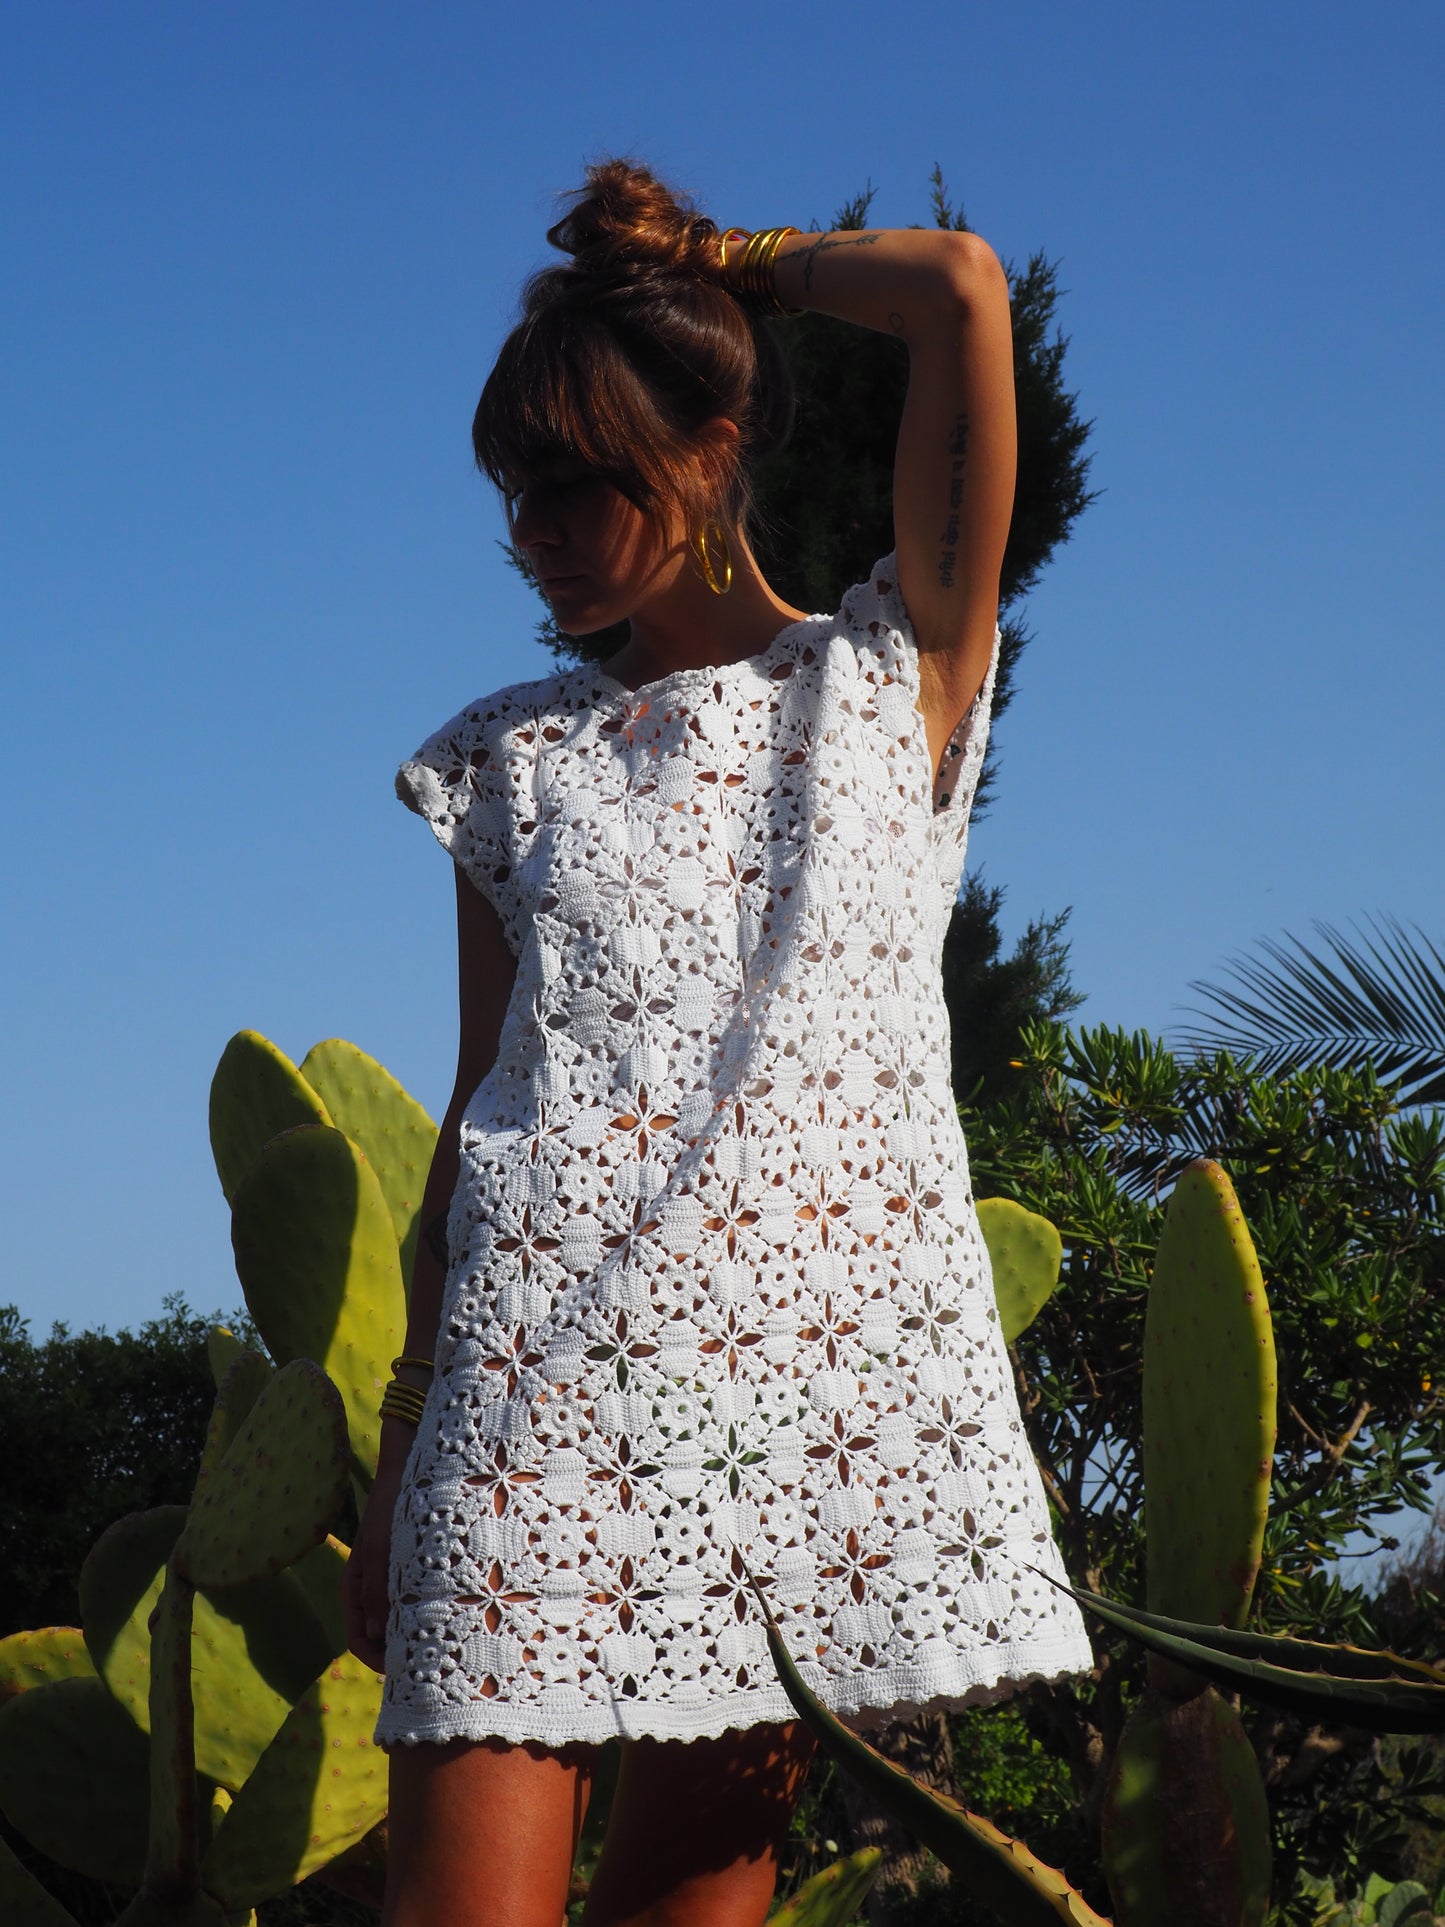 Super cute lace dress or beach cover up made from high quality antique lace crochet up-cycled by Vagabond Ibiza